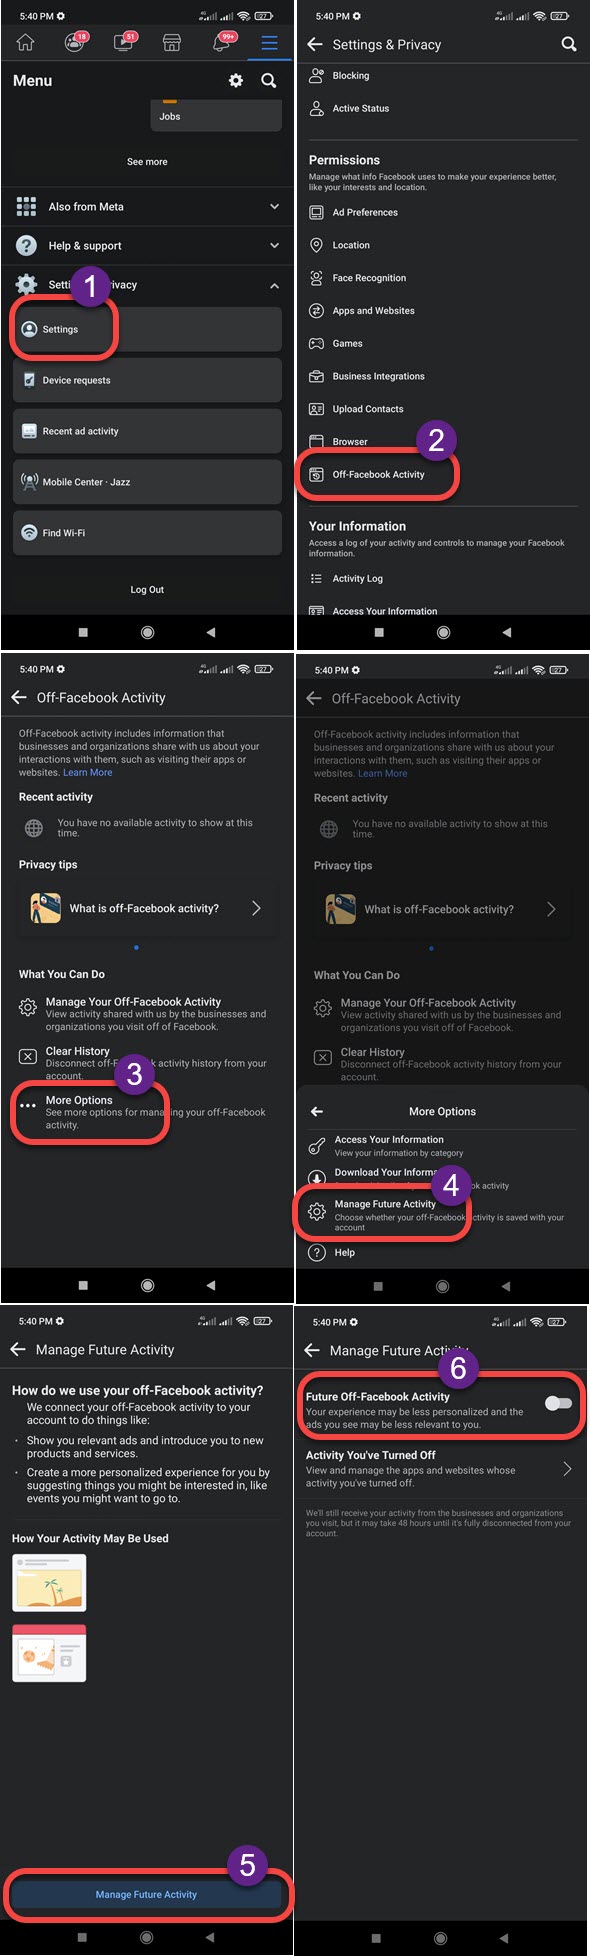 how to turn off off-facebook activity